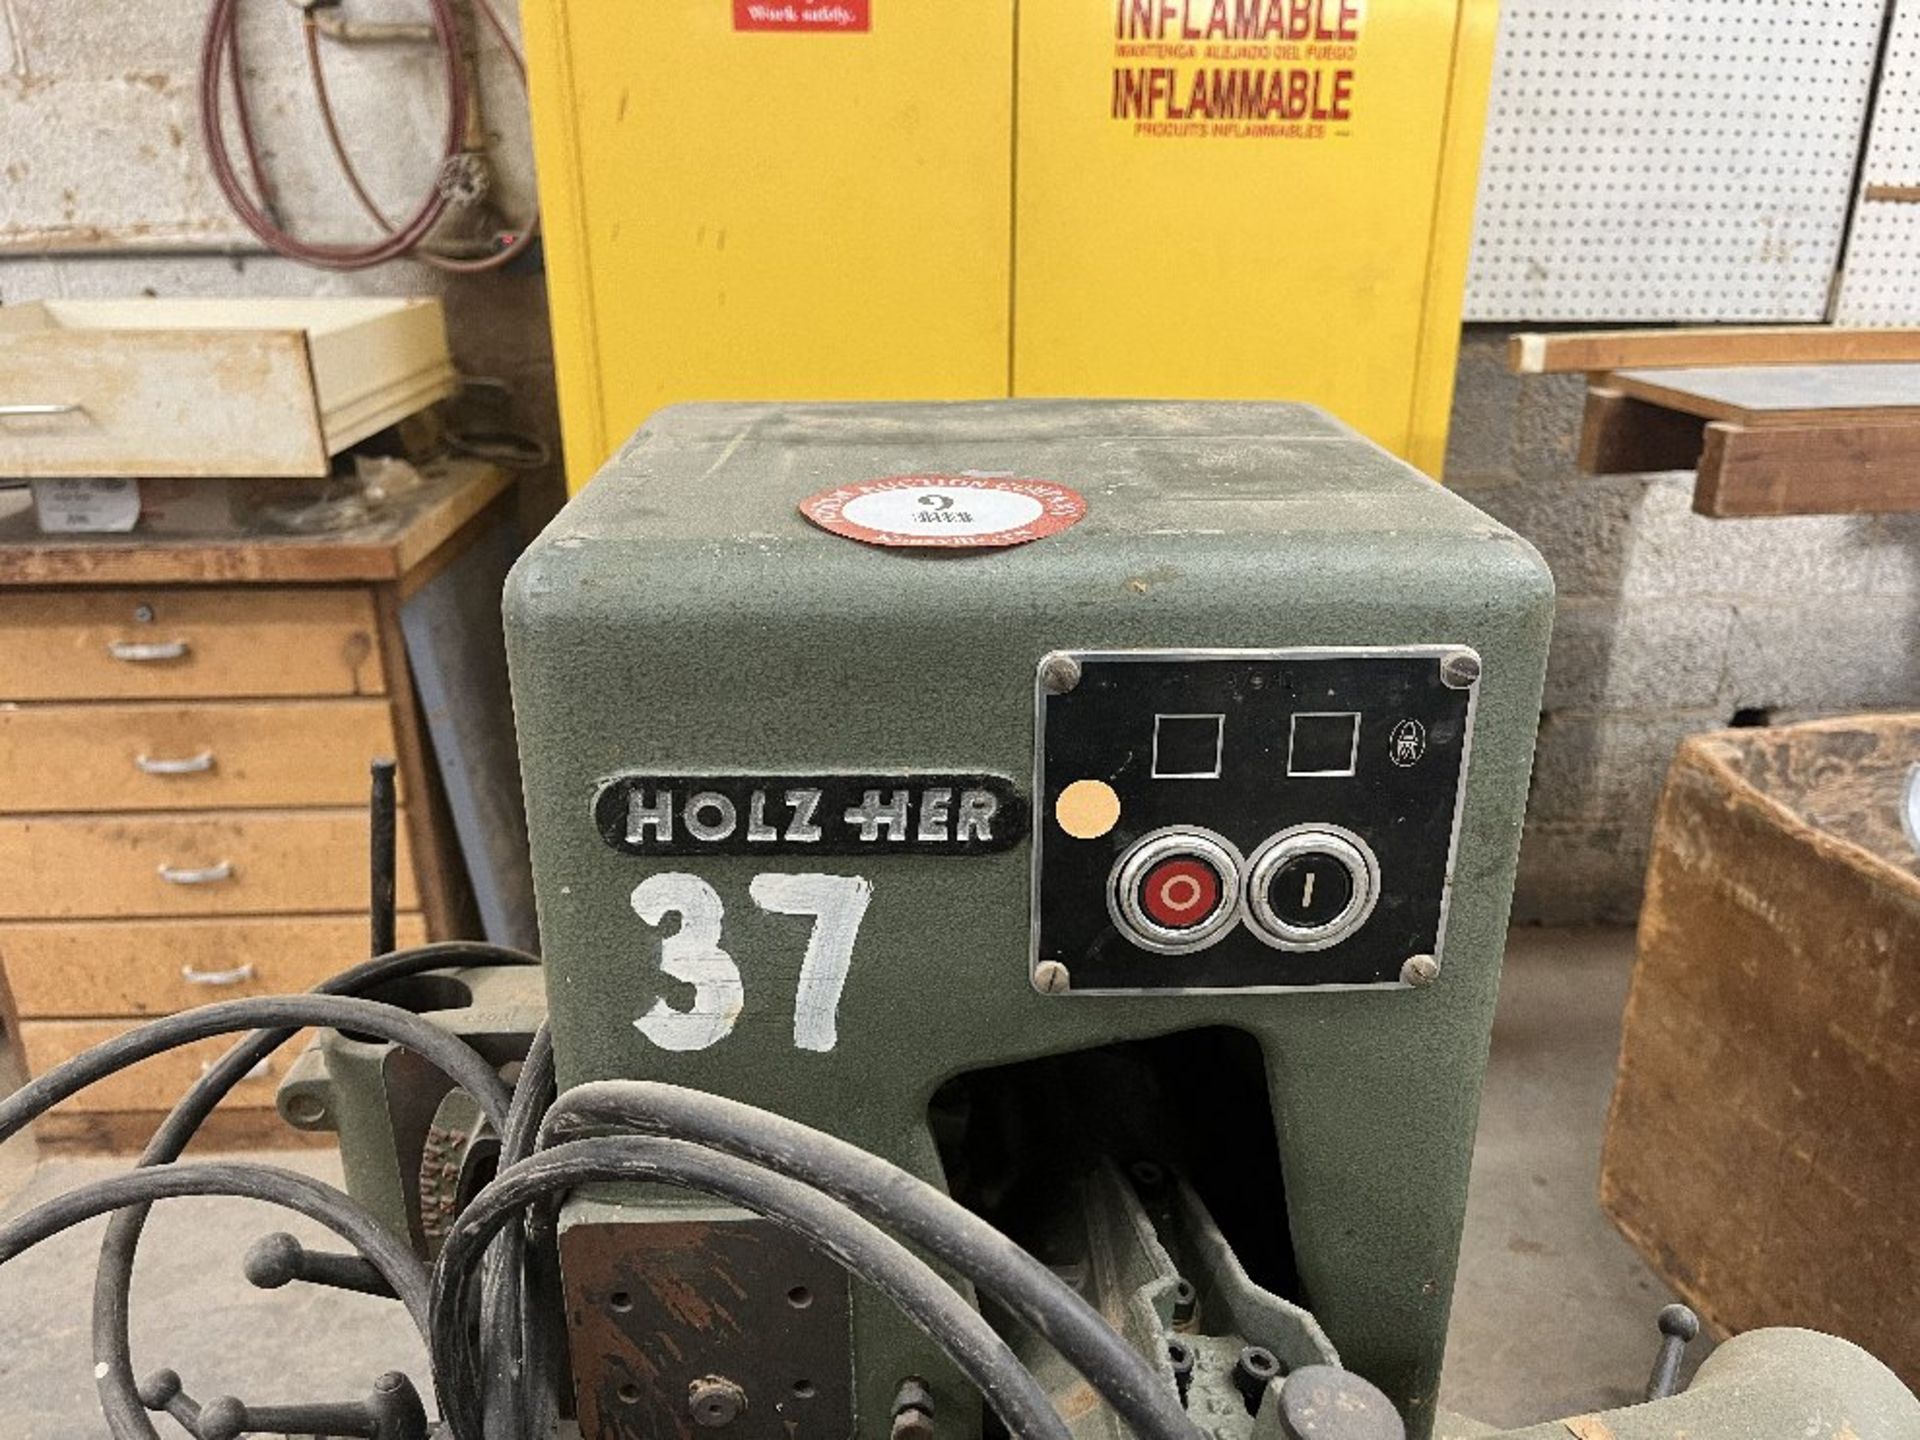 Holz-Her KM Reich Edge Trimmer Type UF362, S/N 3393, 240v/3 phase - Image 2 of 2